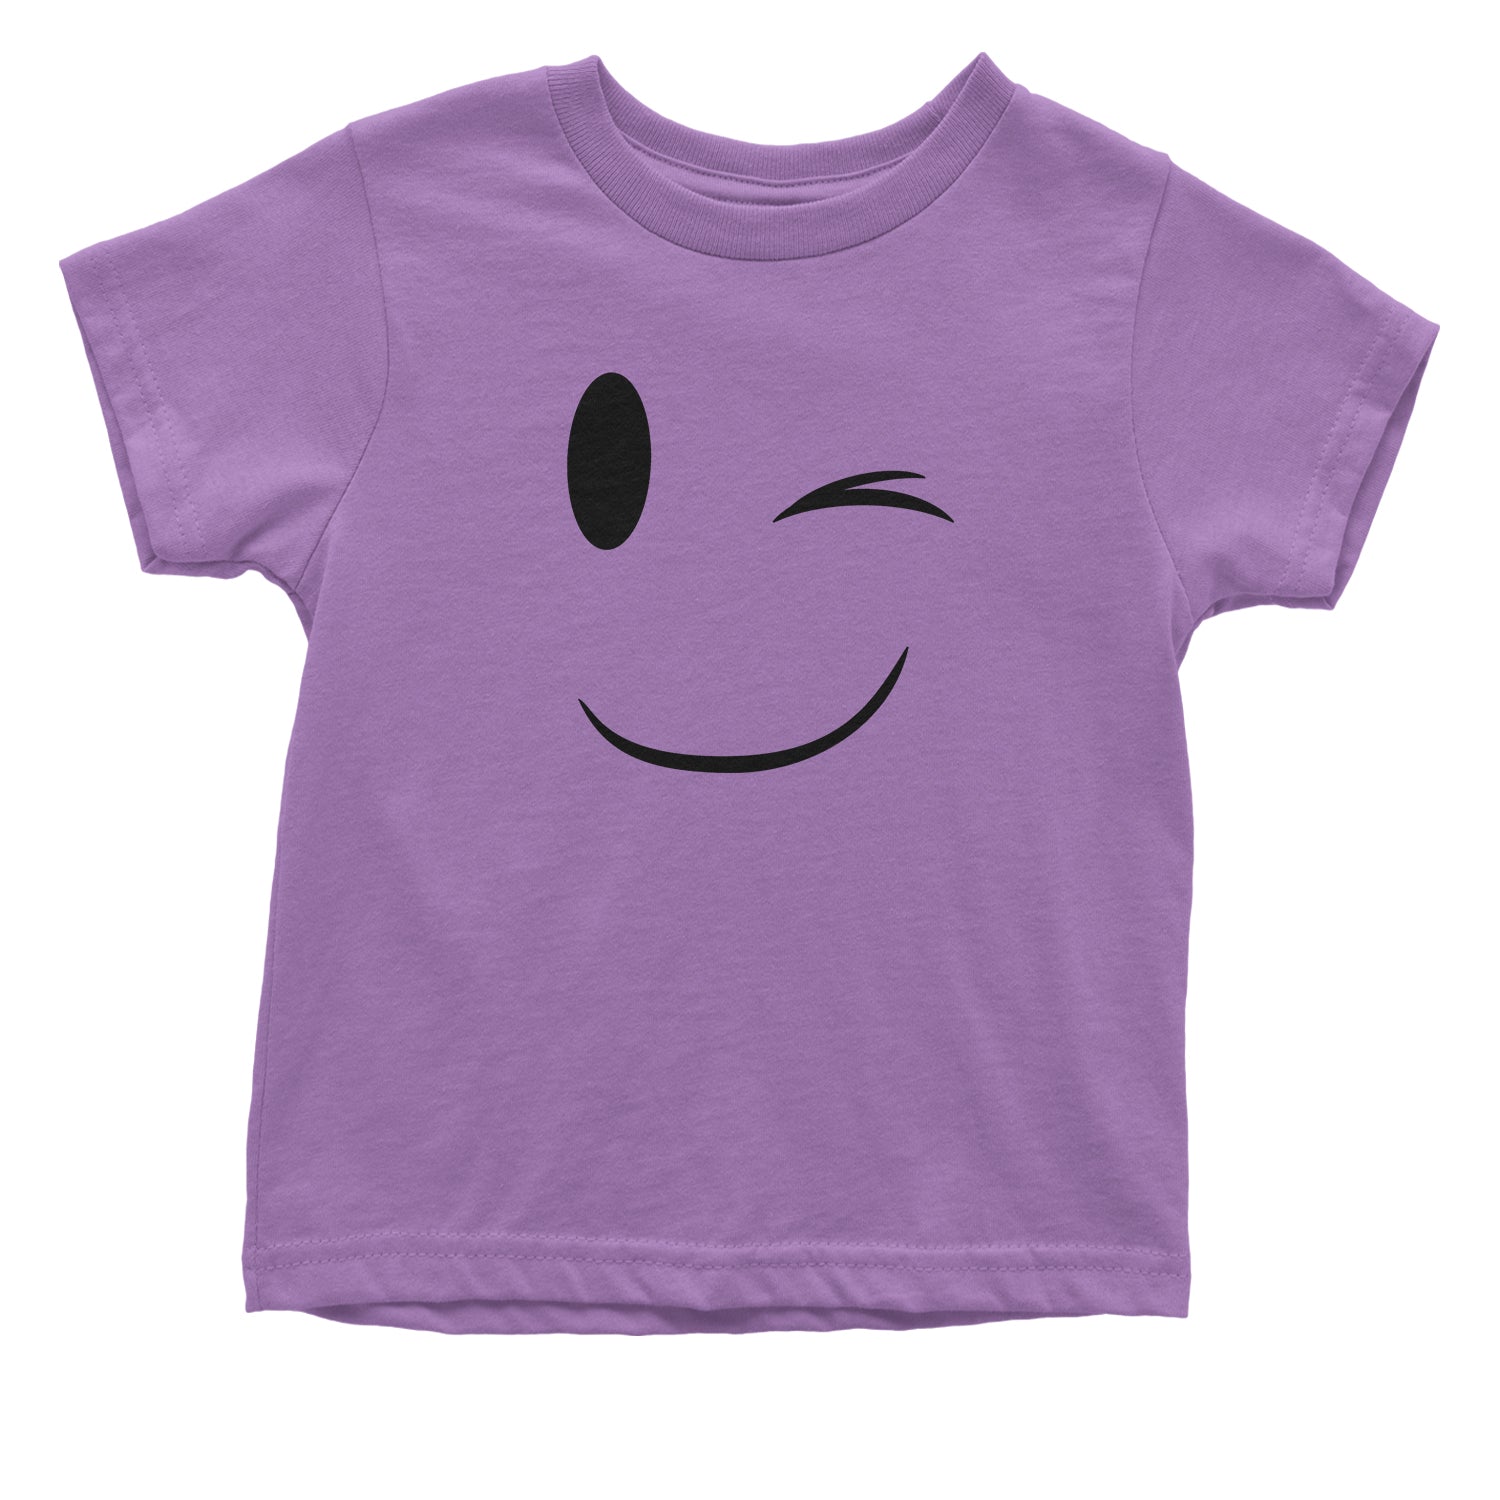 Emoticon Winking Smile Face Toddler T-Shirt cosplay, costume, dress, emoji, emote, face, halloween, smiley, up, yellow by Expression Tees